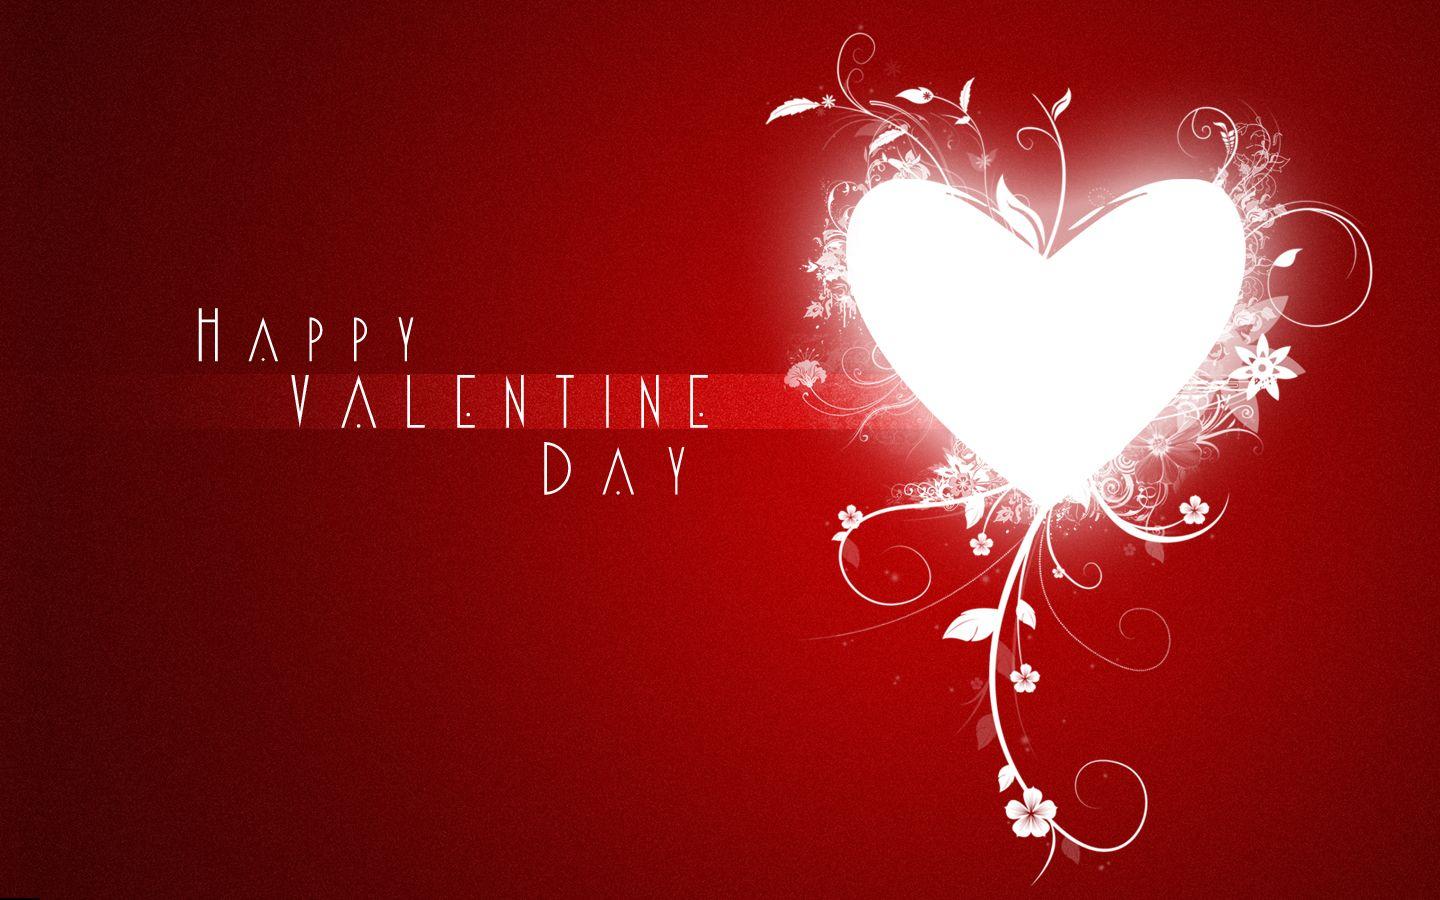 Best Valentines Day Wallpaper to Send your Loved Ones